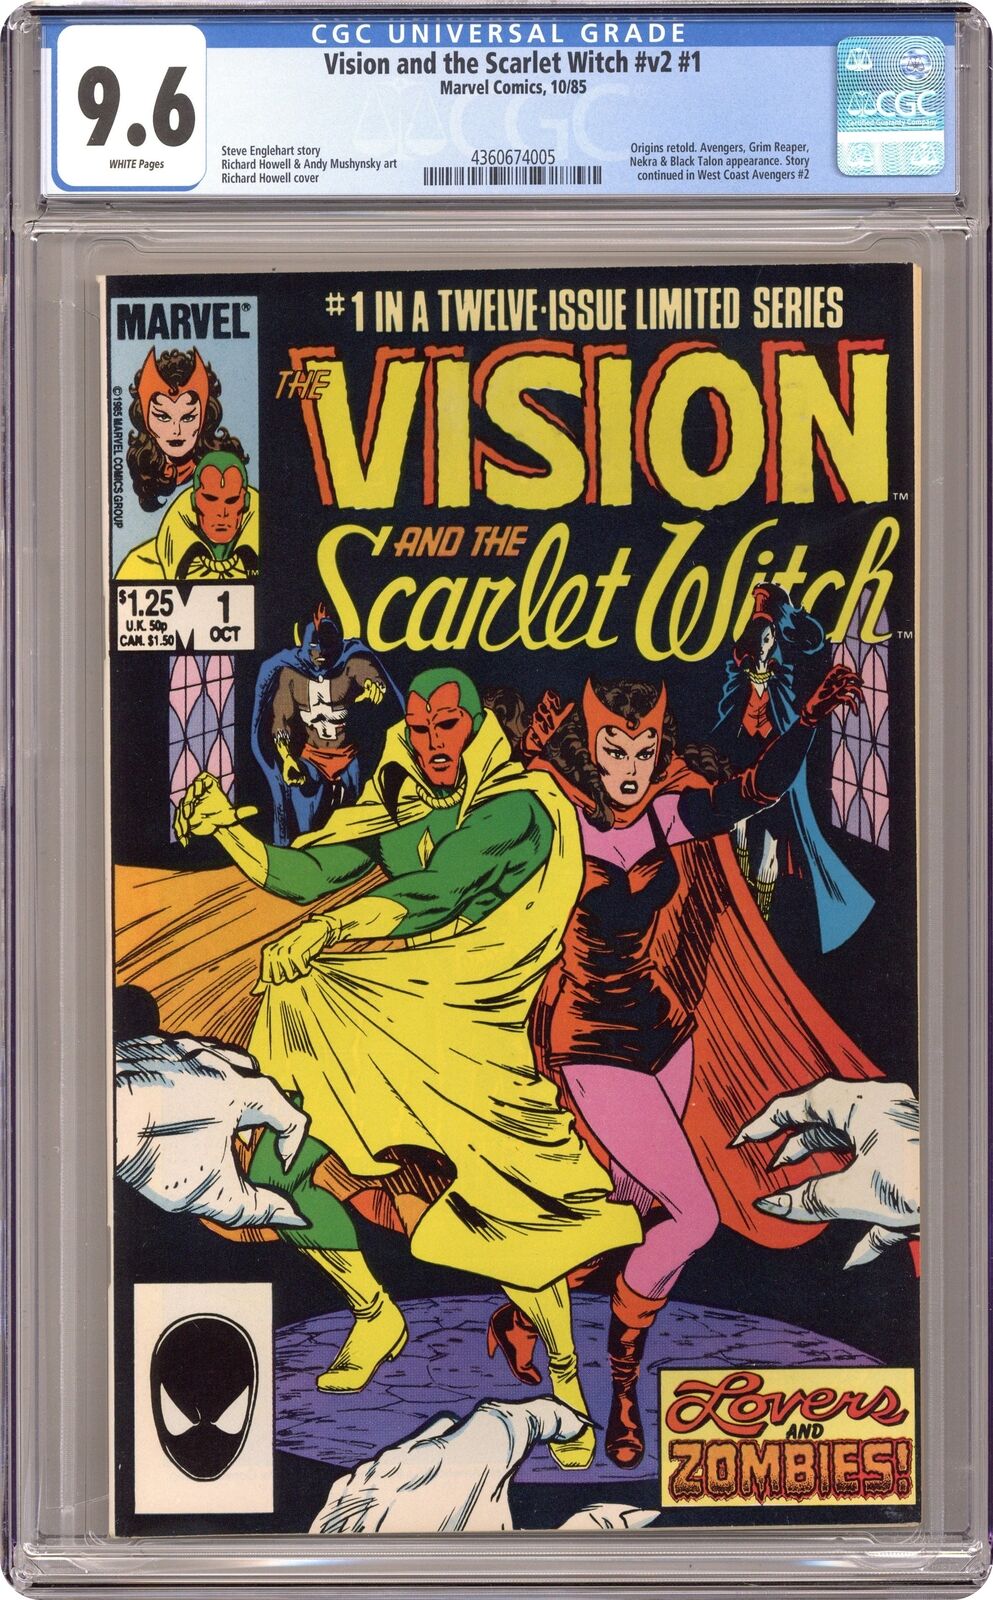 Vision and the Scarlet Witch #1 CGC 9.6 1985 4360674005